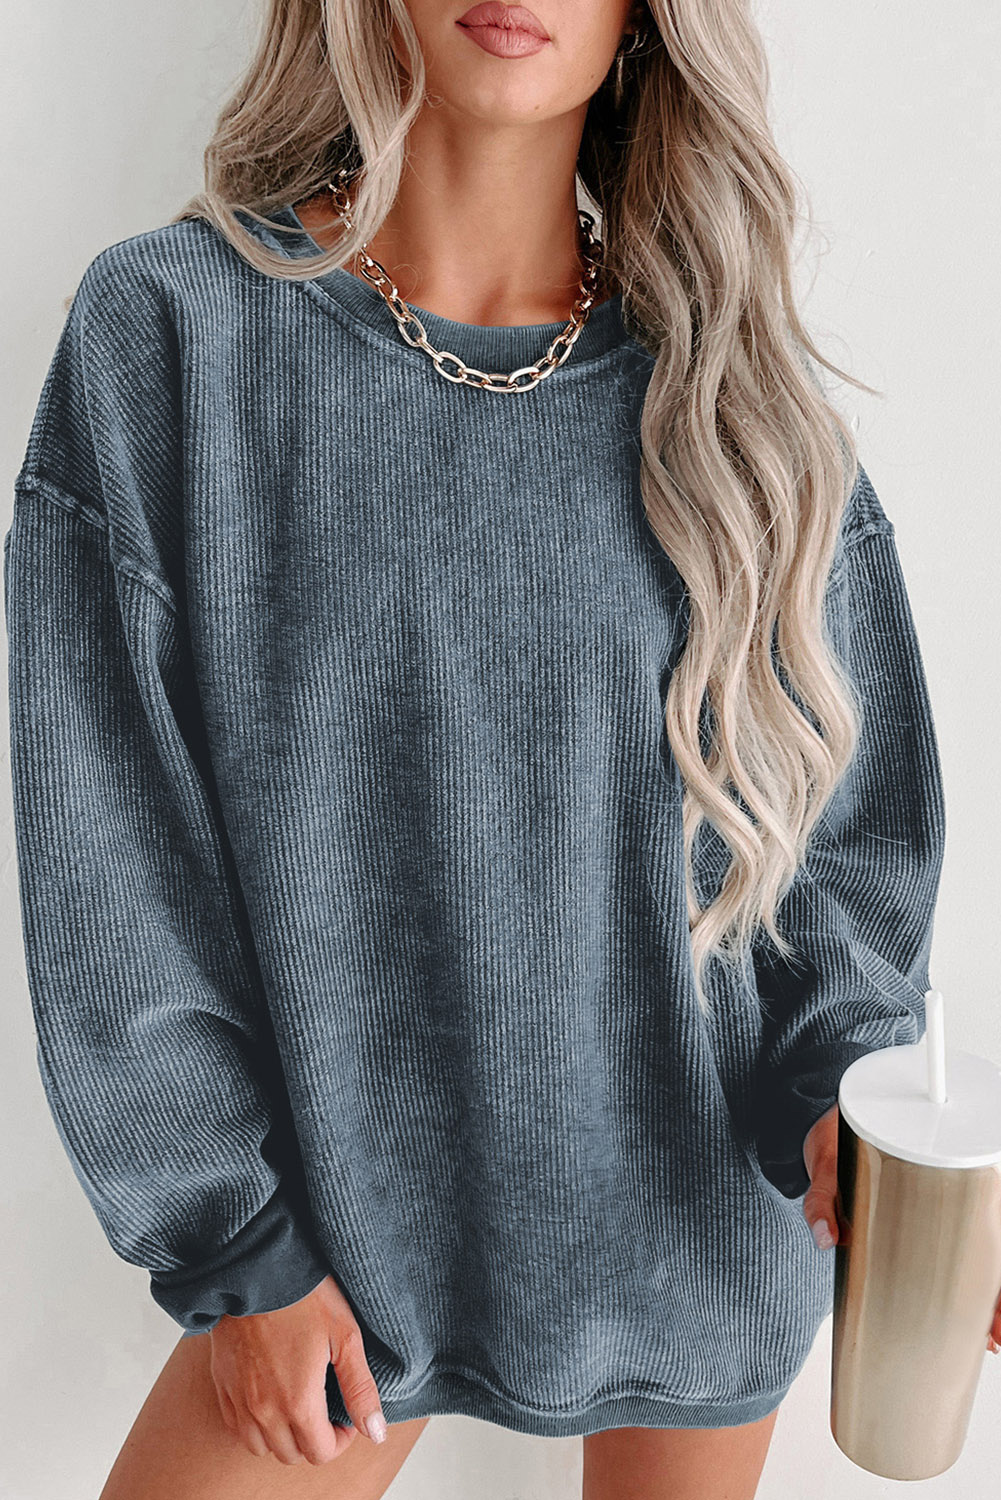 Shewin Wholesale Southern Clothing  Blue Plain Solid Ribbed Knit Round Neck Pullover Sweatshirt